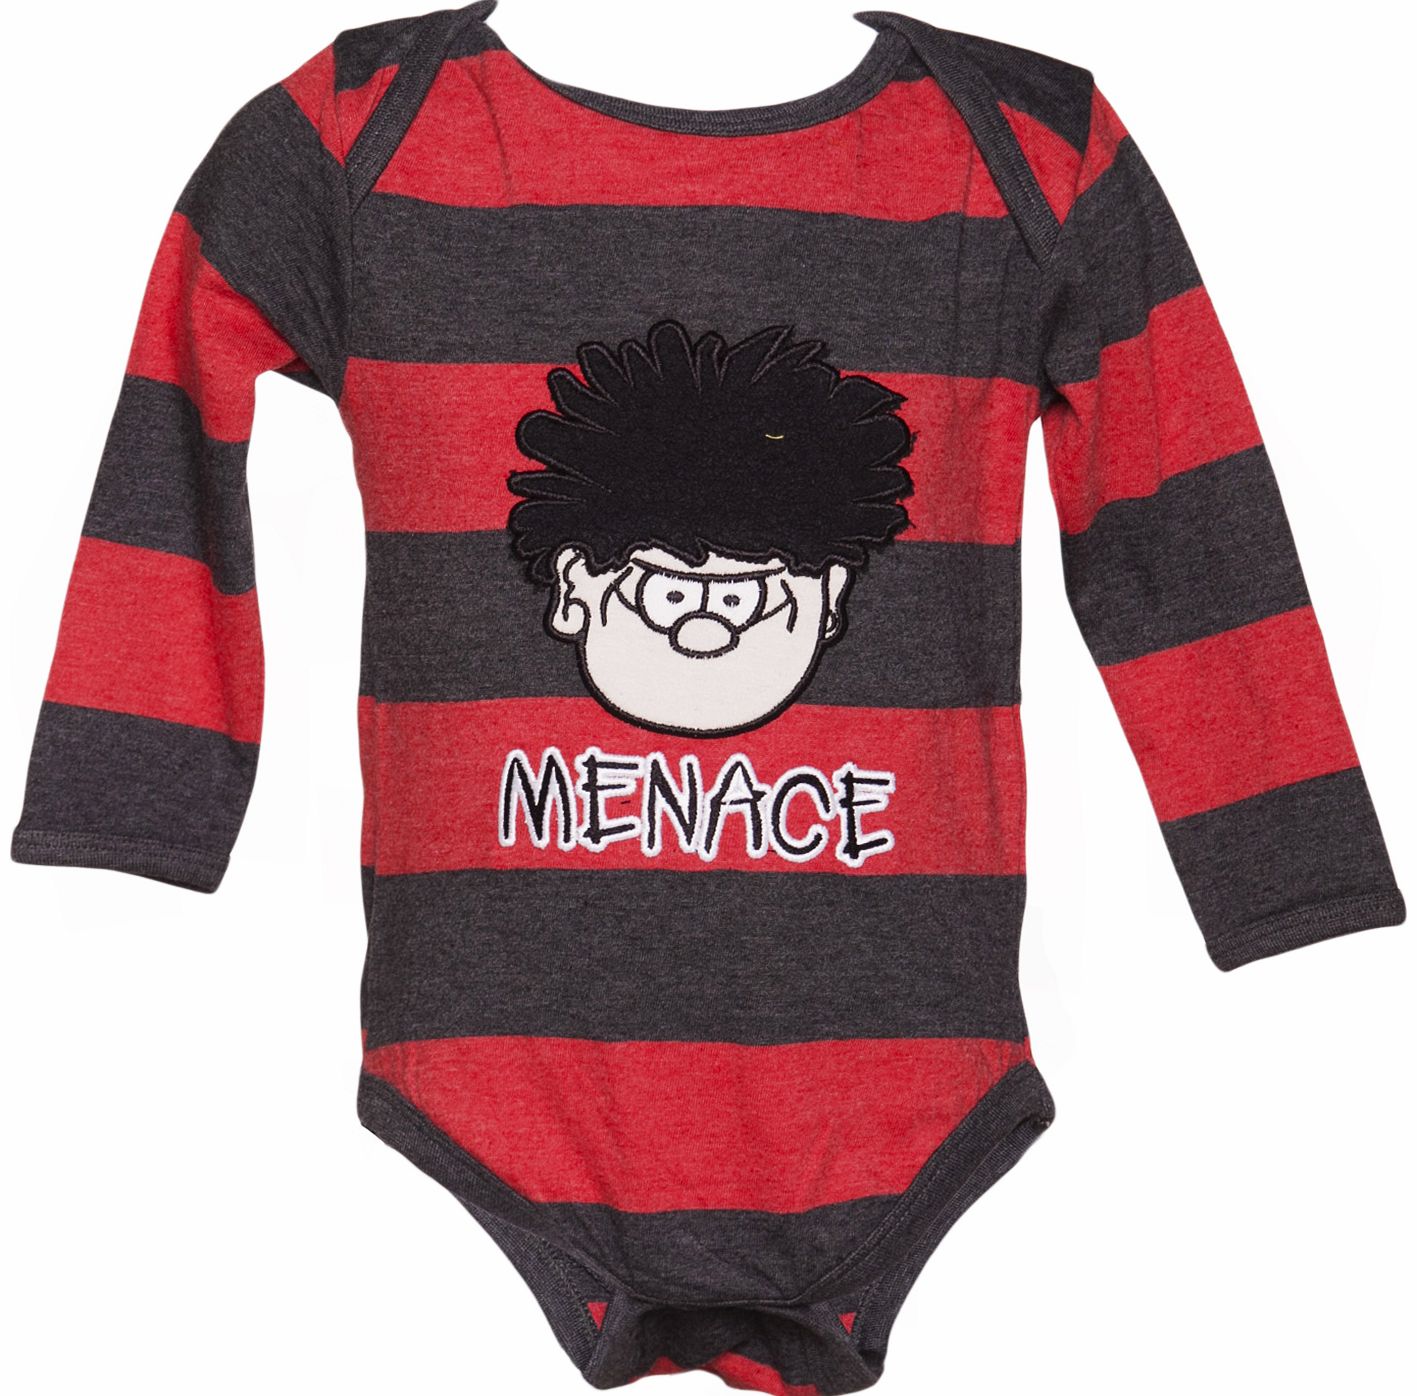 Fabric flavours Kids Black And Red Dennis The Menace Babygrow